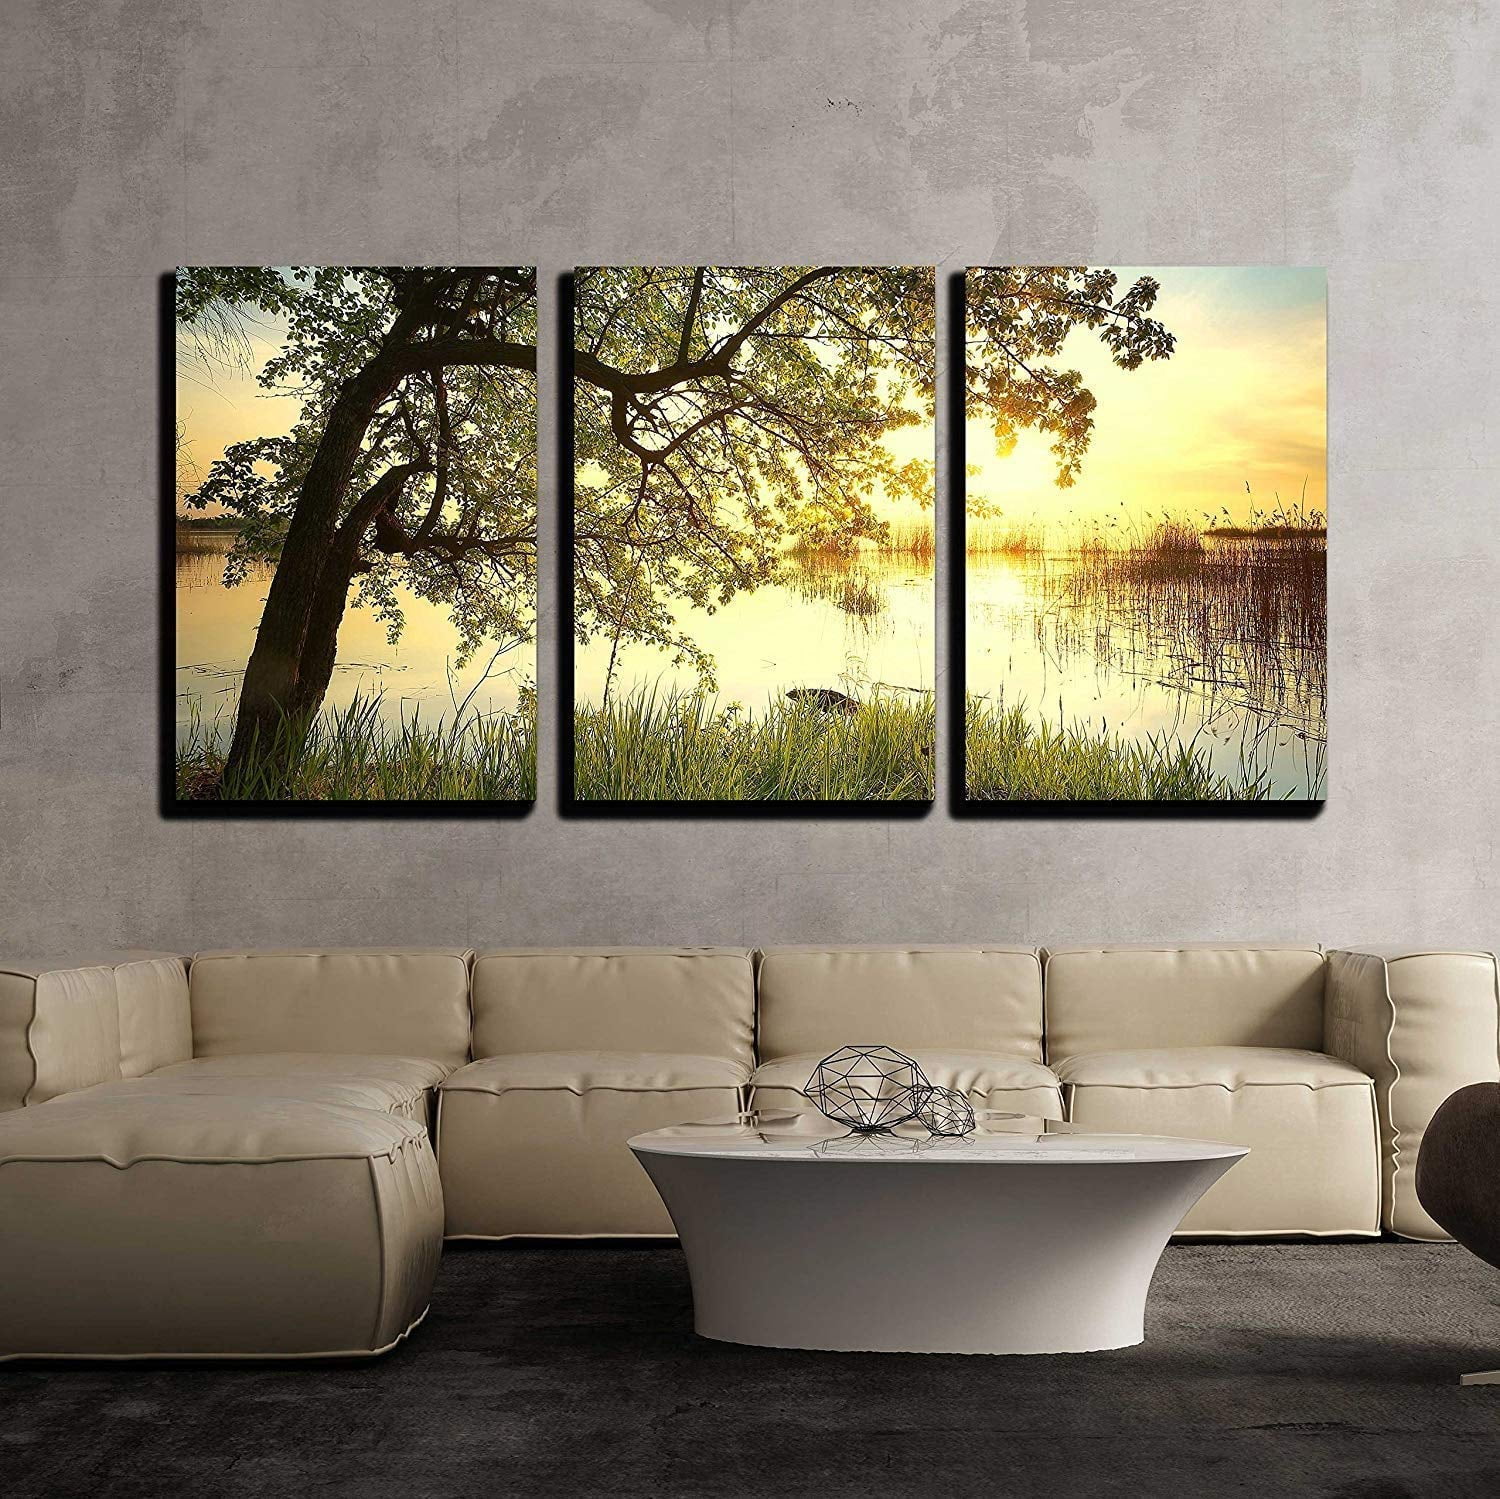 Silhouette of a Tree Perfect gift for any occasion 101cm x 71cm 40x28 Multi Split 4 Panel Canvas Artwork Art Print